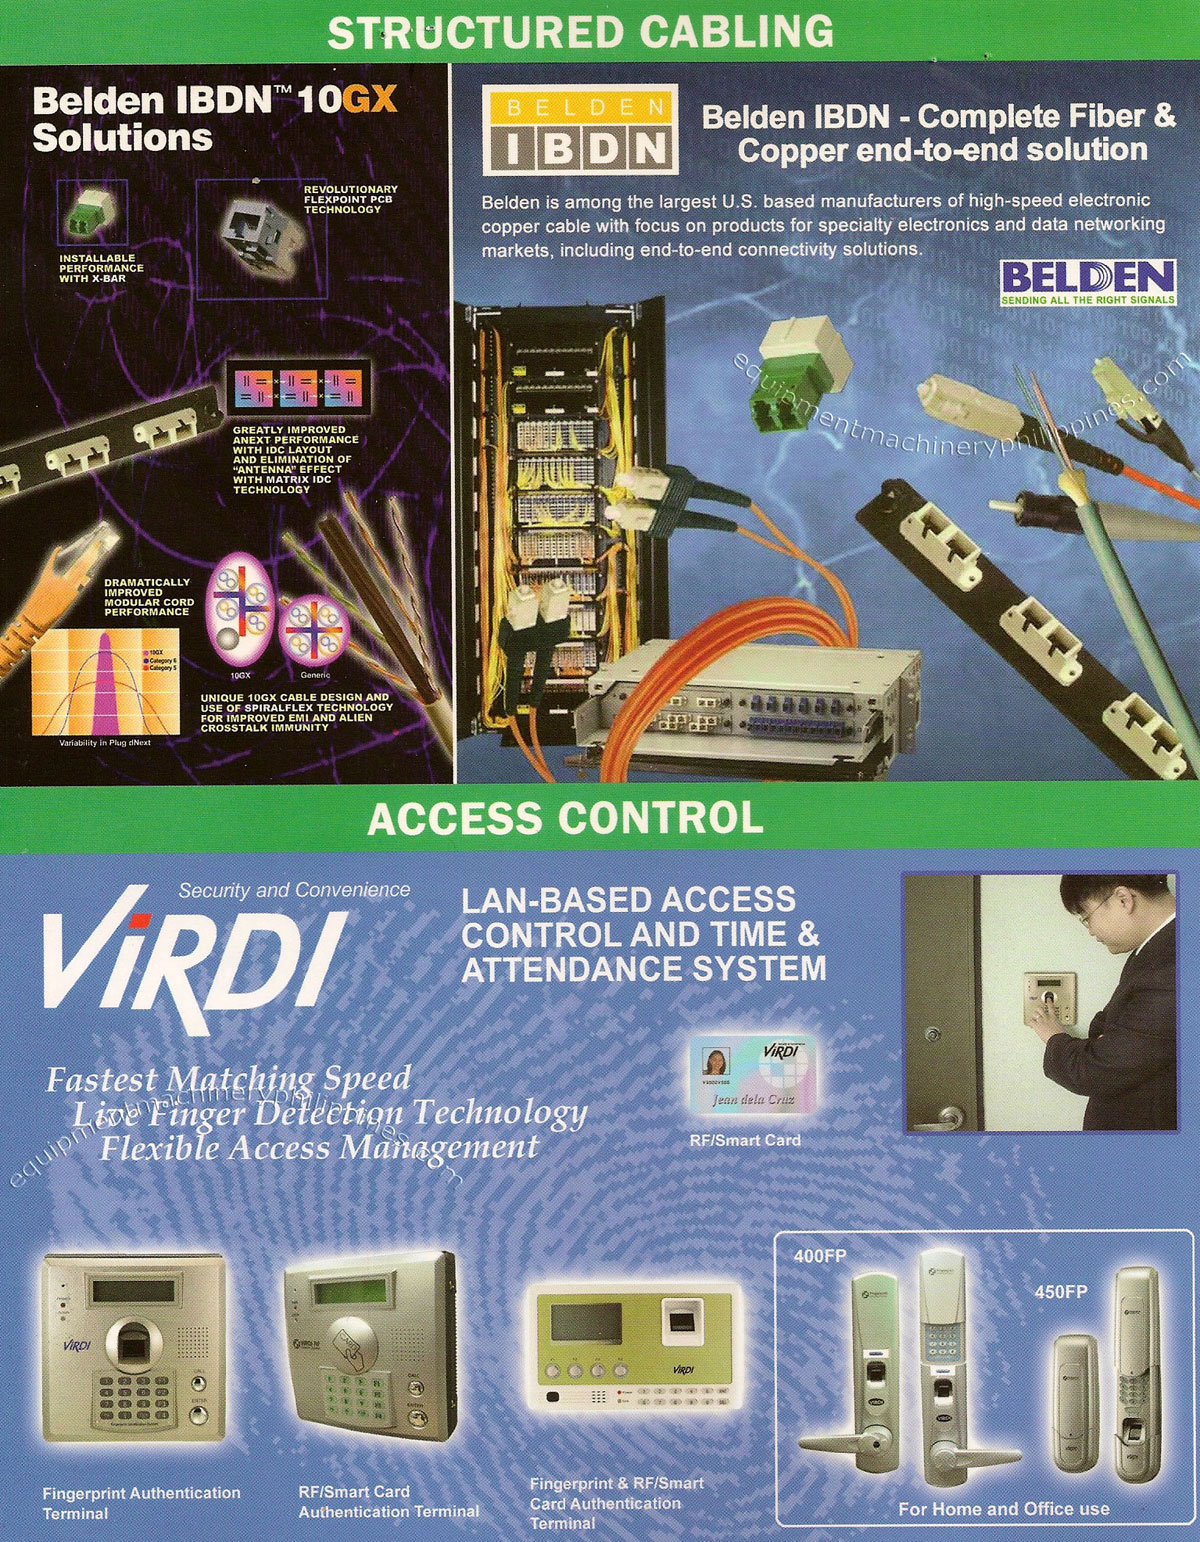 Belden Fiber and Copper End to End Structured Cabling; Virdi LAN Based Access Control Time and Attendance System